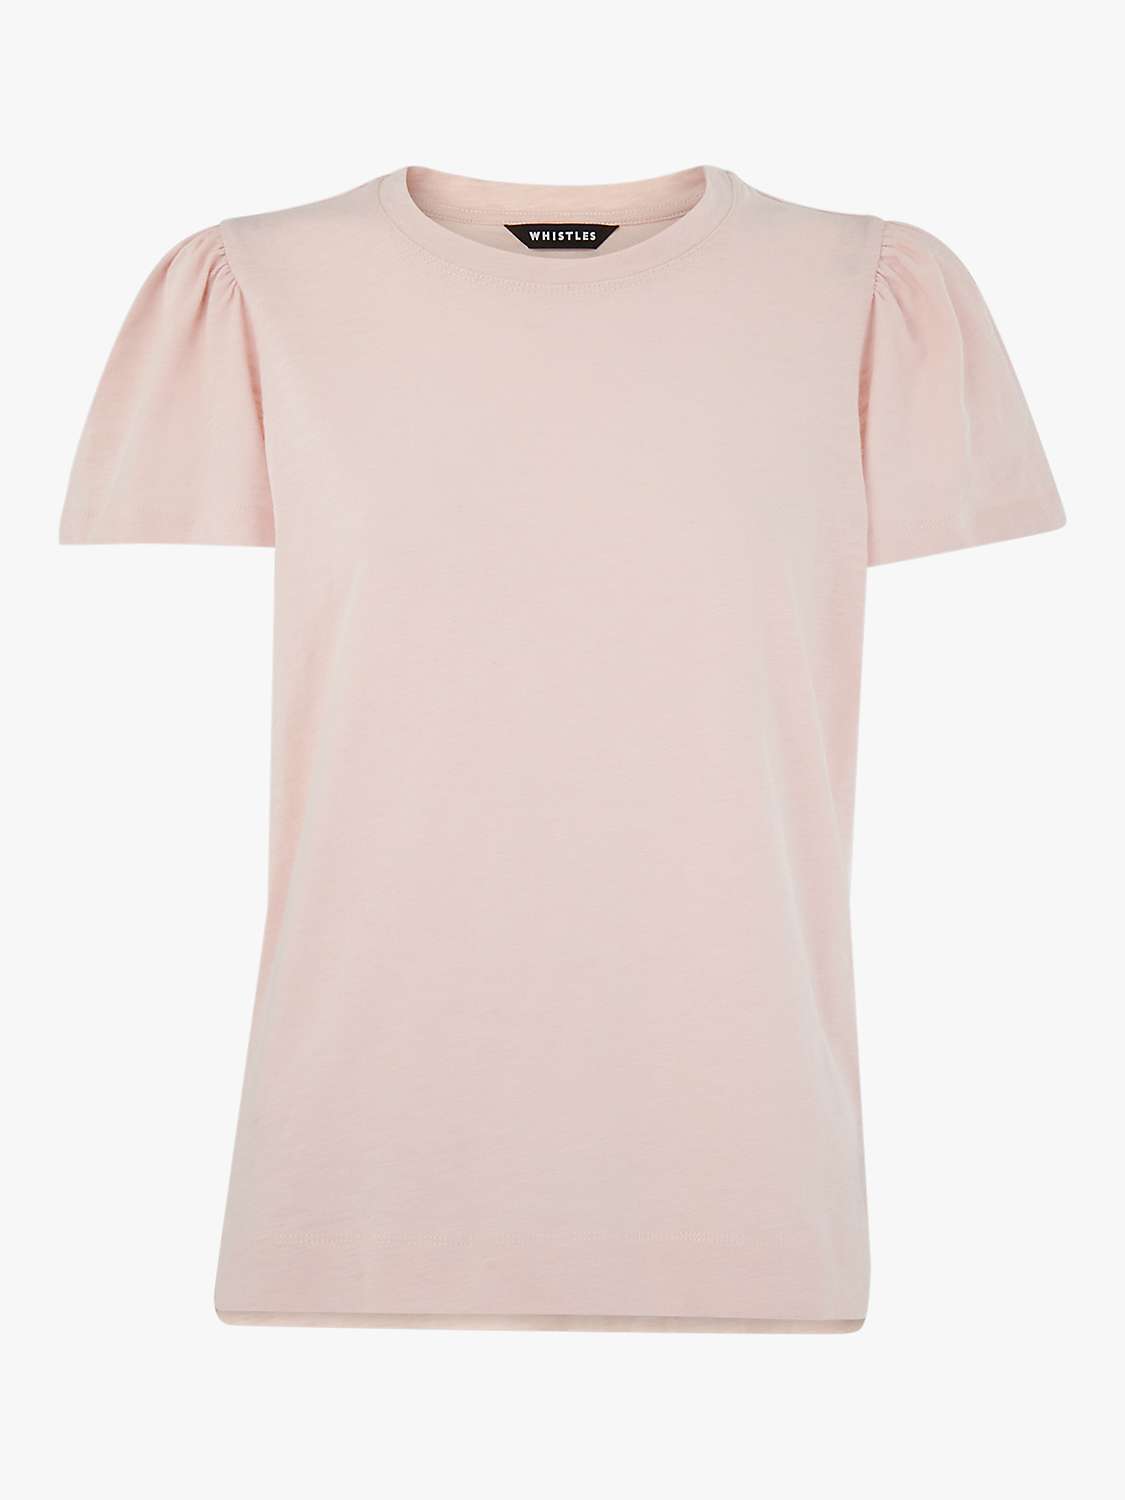 Buy Whistles Cotton Frill Sleeve Top, Pale Pink Online at johnlewis.com